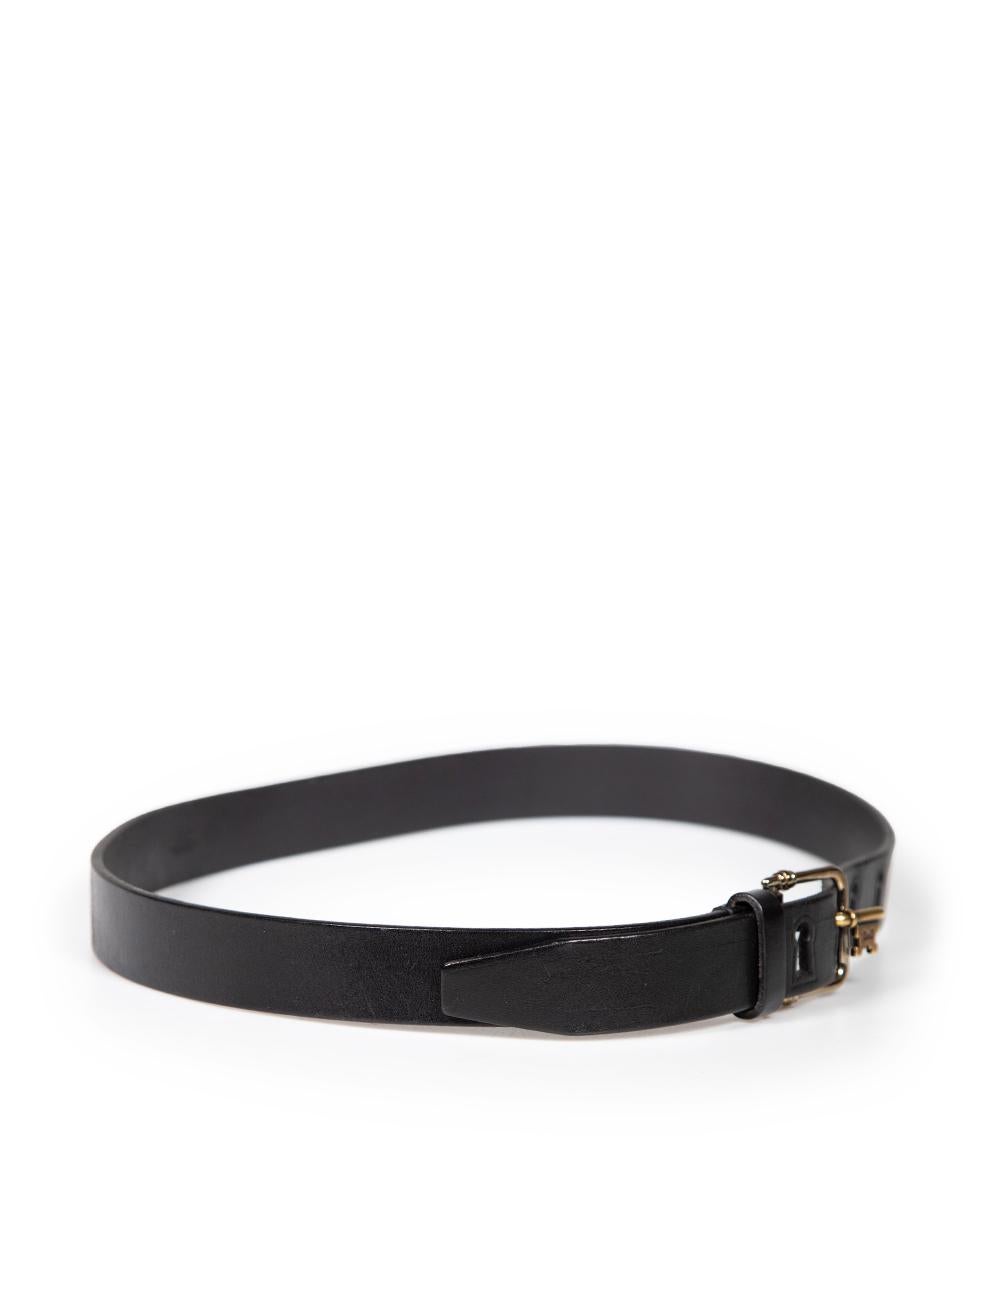 CONDITION is Very good. Minimal wear to belt is evident. Minimal wear to the front with light scratch to the leather on this used D&G designer resale item. This item comes with original dust bag.
 
 
 
 Details
 
 
 Black
 
 Leather
 
 Waist belt
 
